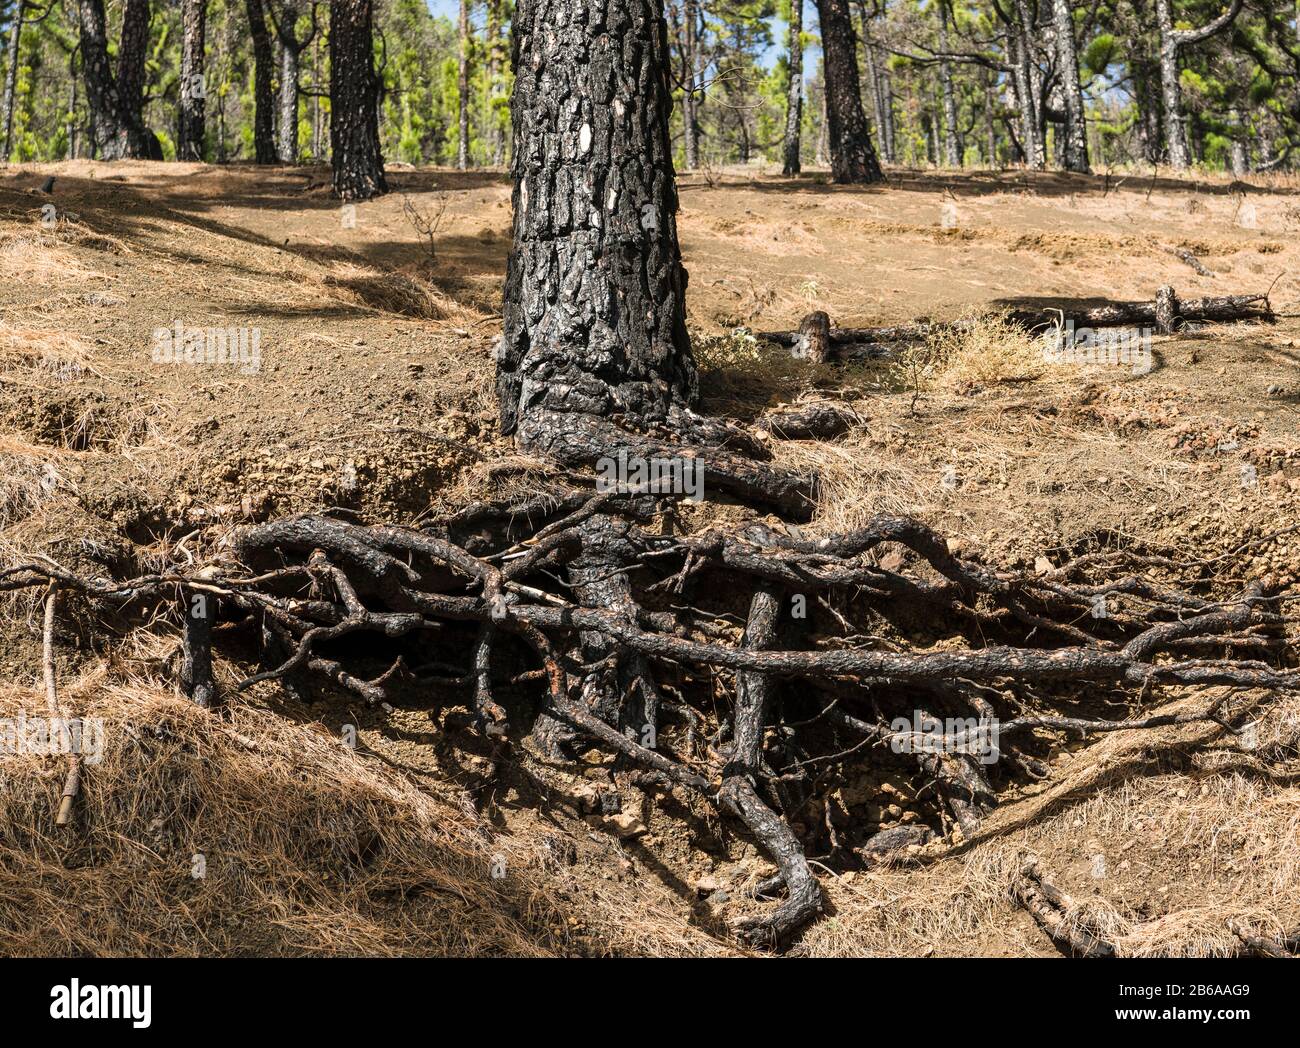 Native Canarian pine trees (Pinus canariensis) which were burnt in a forest fire but are now recovering, Llano del Jable, La Palma, Canary Islands Stock Photo